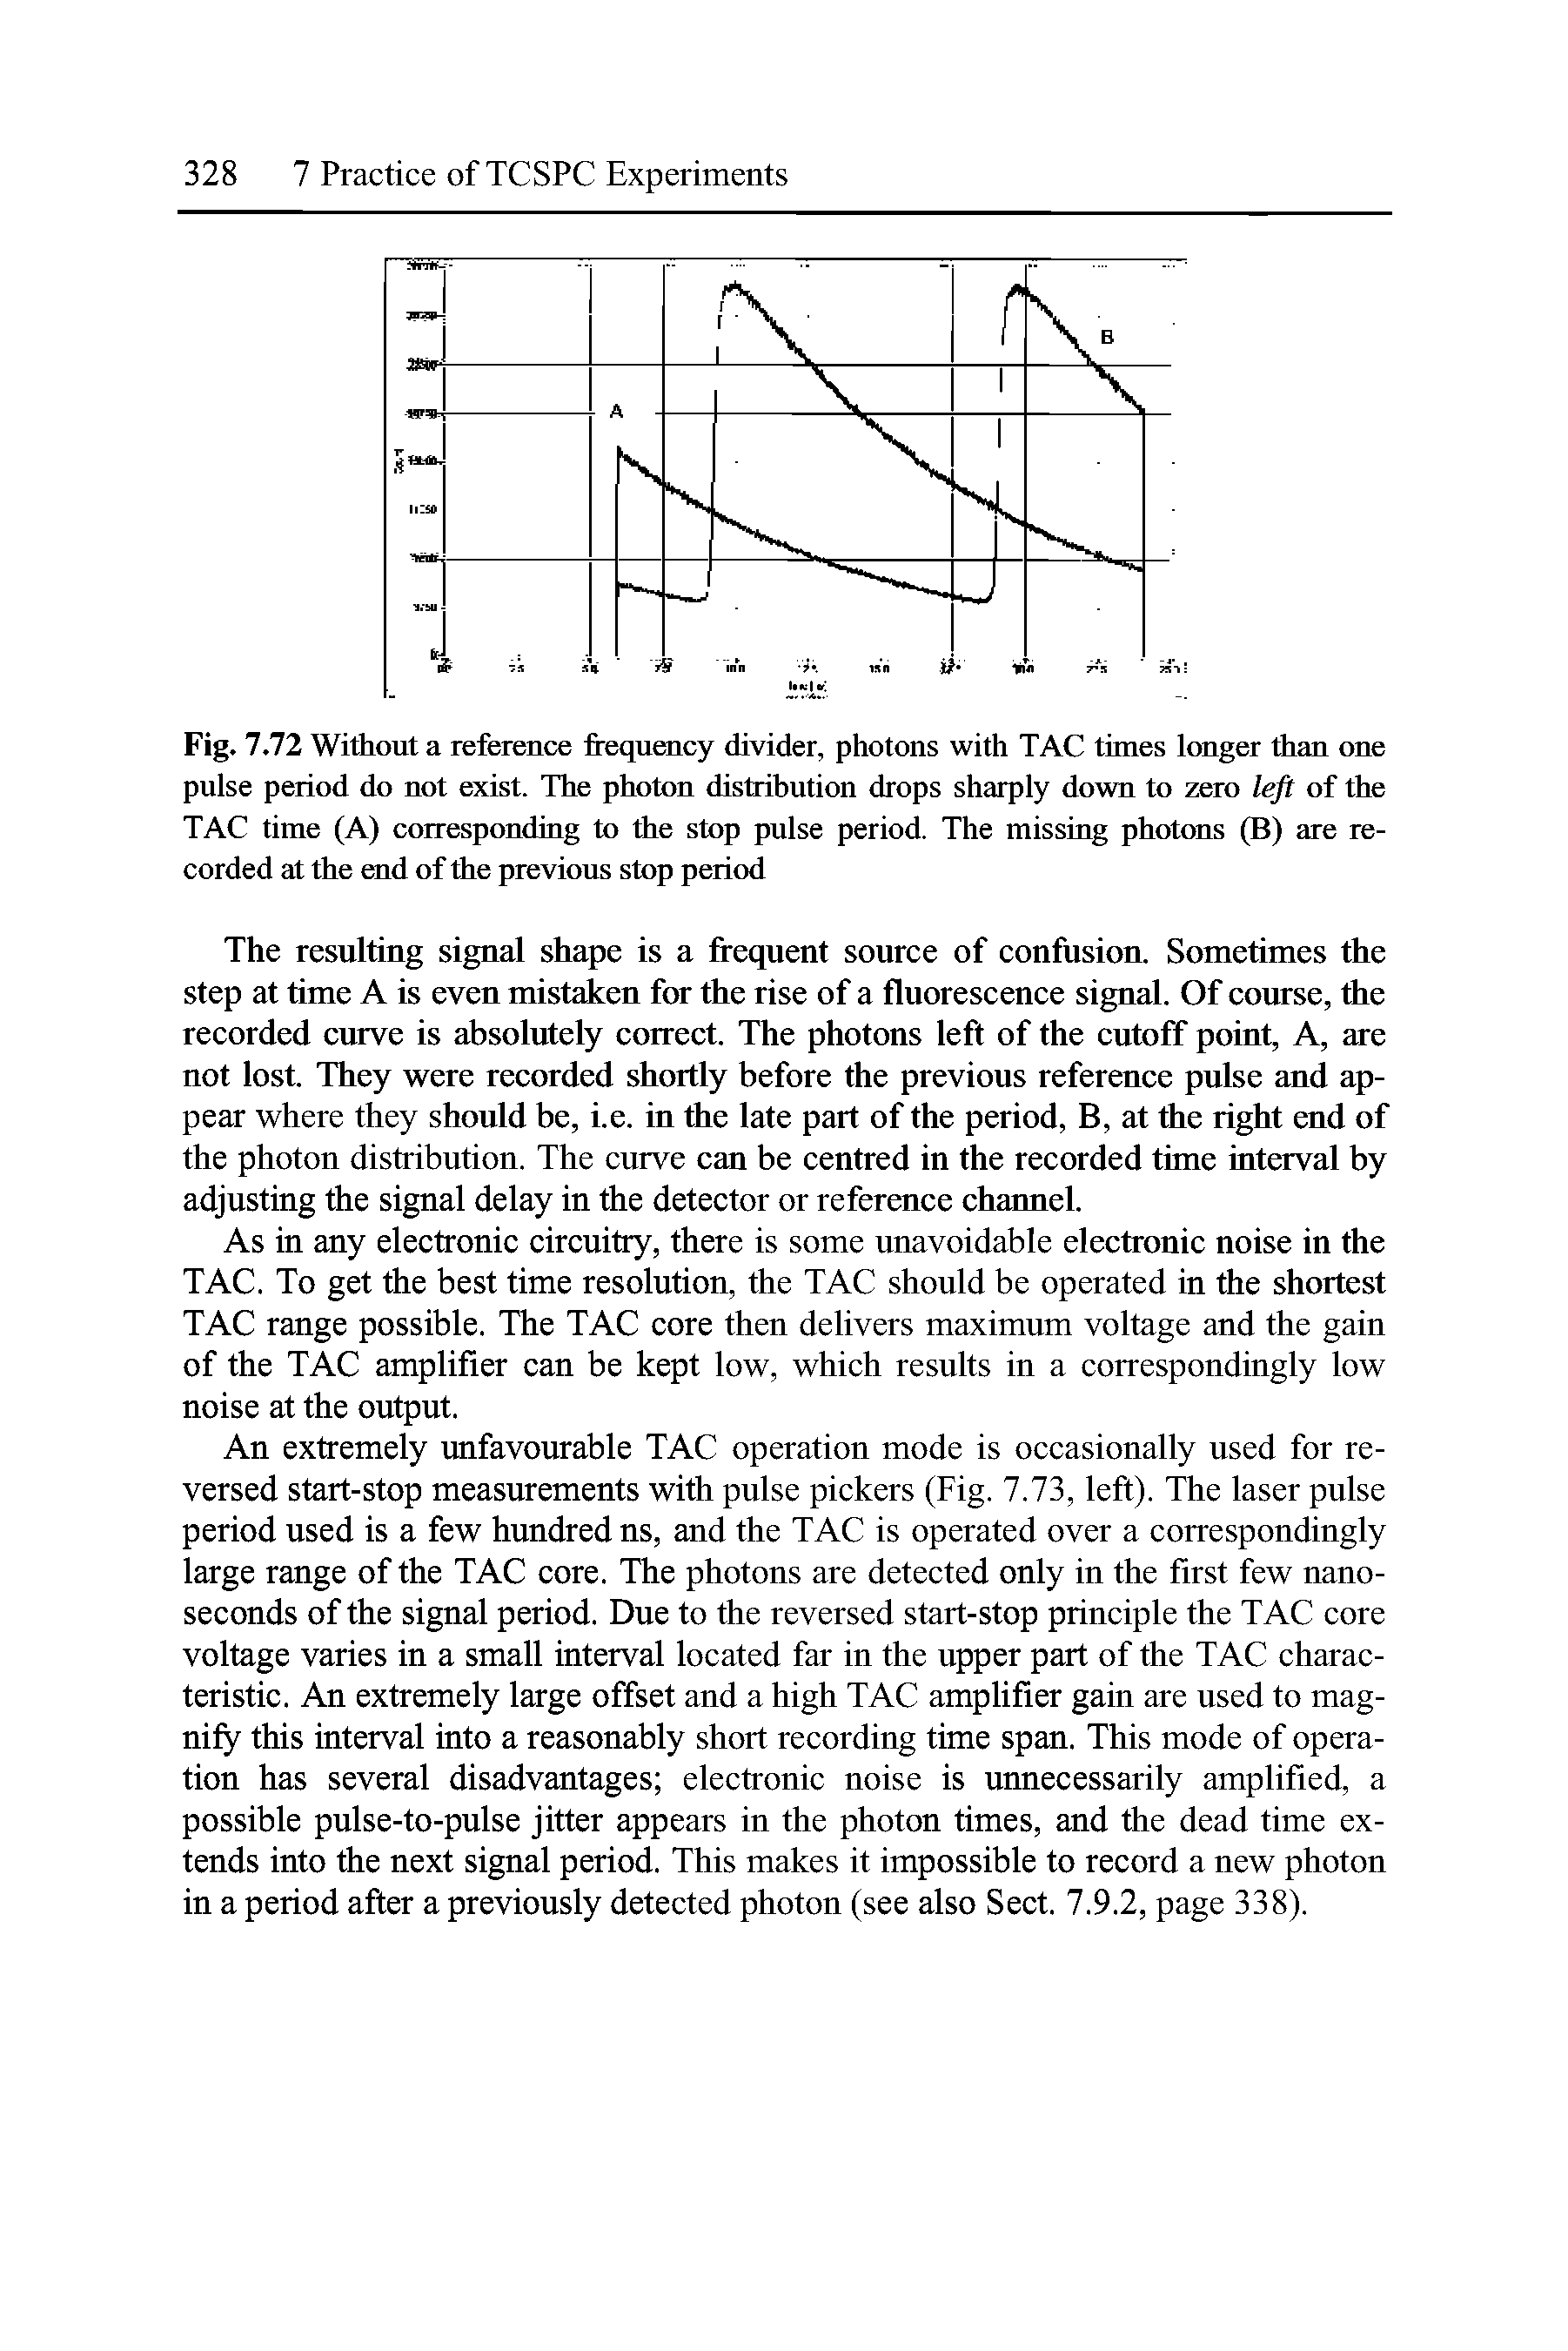 Fig. 7.72 Without a reference frequency divider, photons with TAC times longer than one pulse period do not exist. The photon disfrihution drops sharply down to zero left of the TAC time (A) corresponding to the stop pulse period. The missing photons (B) are recorded at the end of the previous stop period...